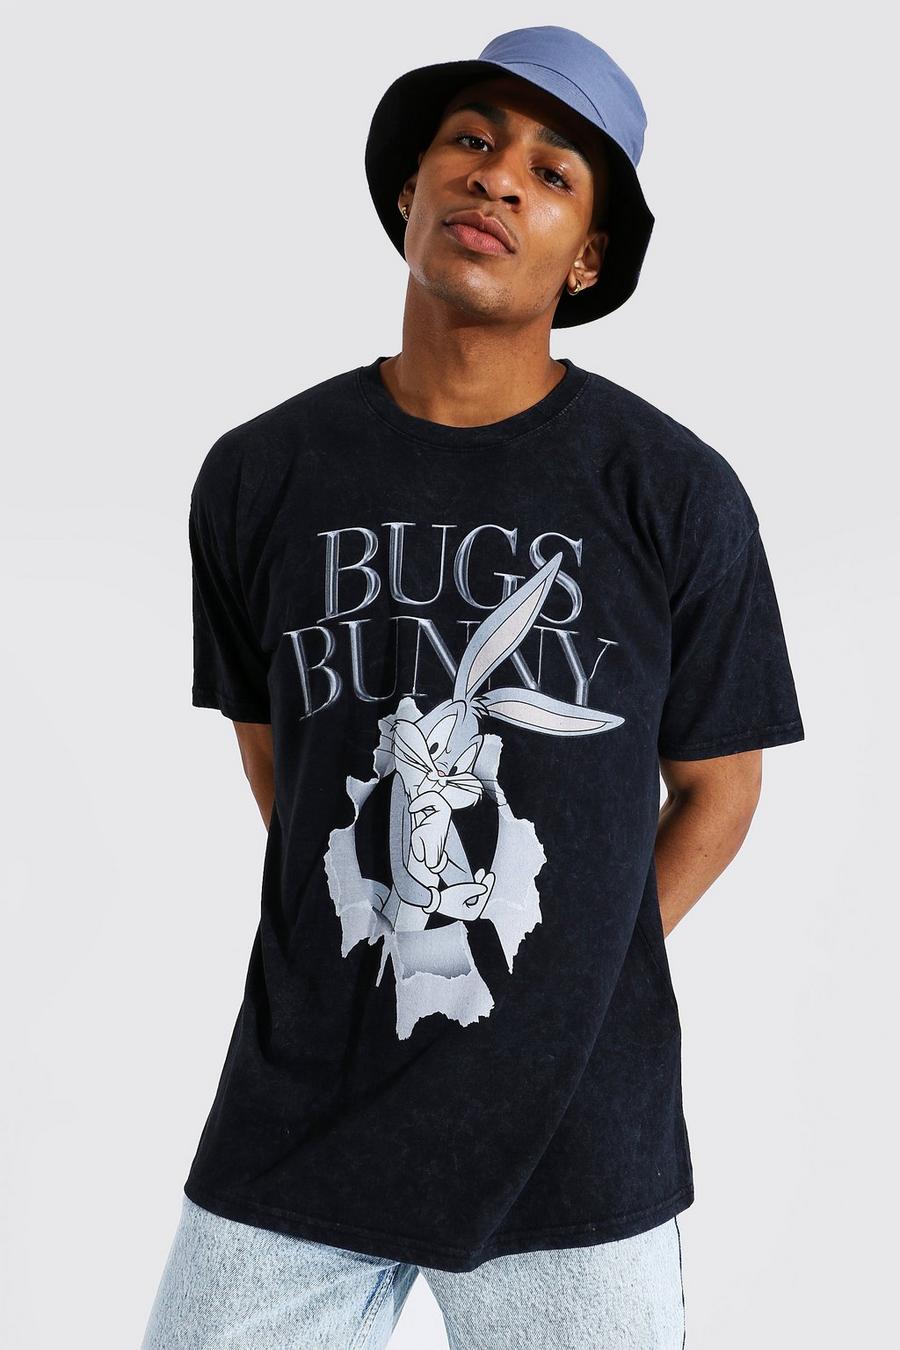 T-shirt oversize ufficiale di Bugs Bunny in lavaggio acido, Charcoal image number 1